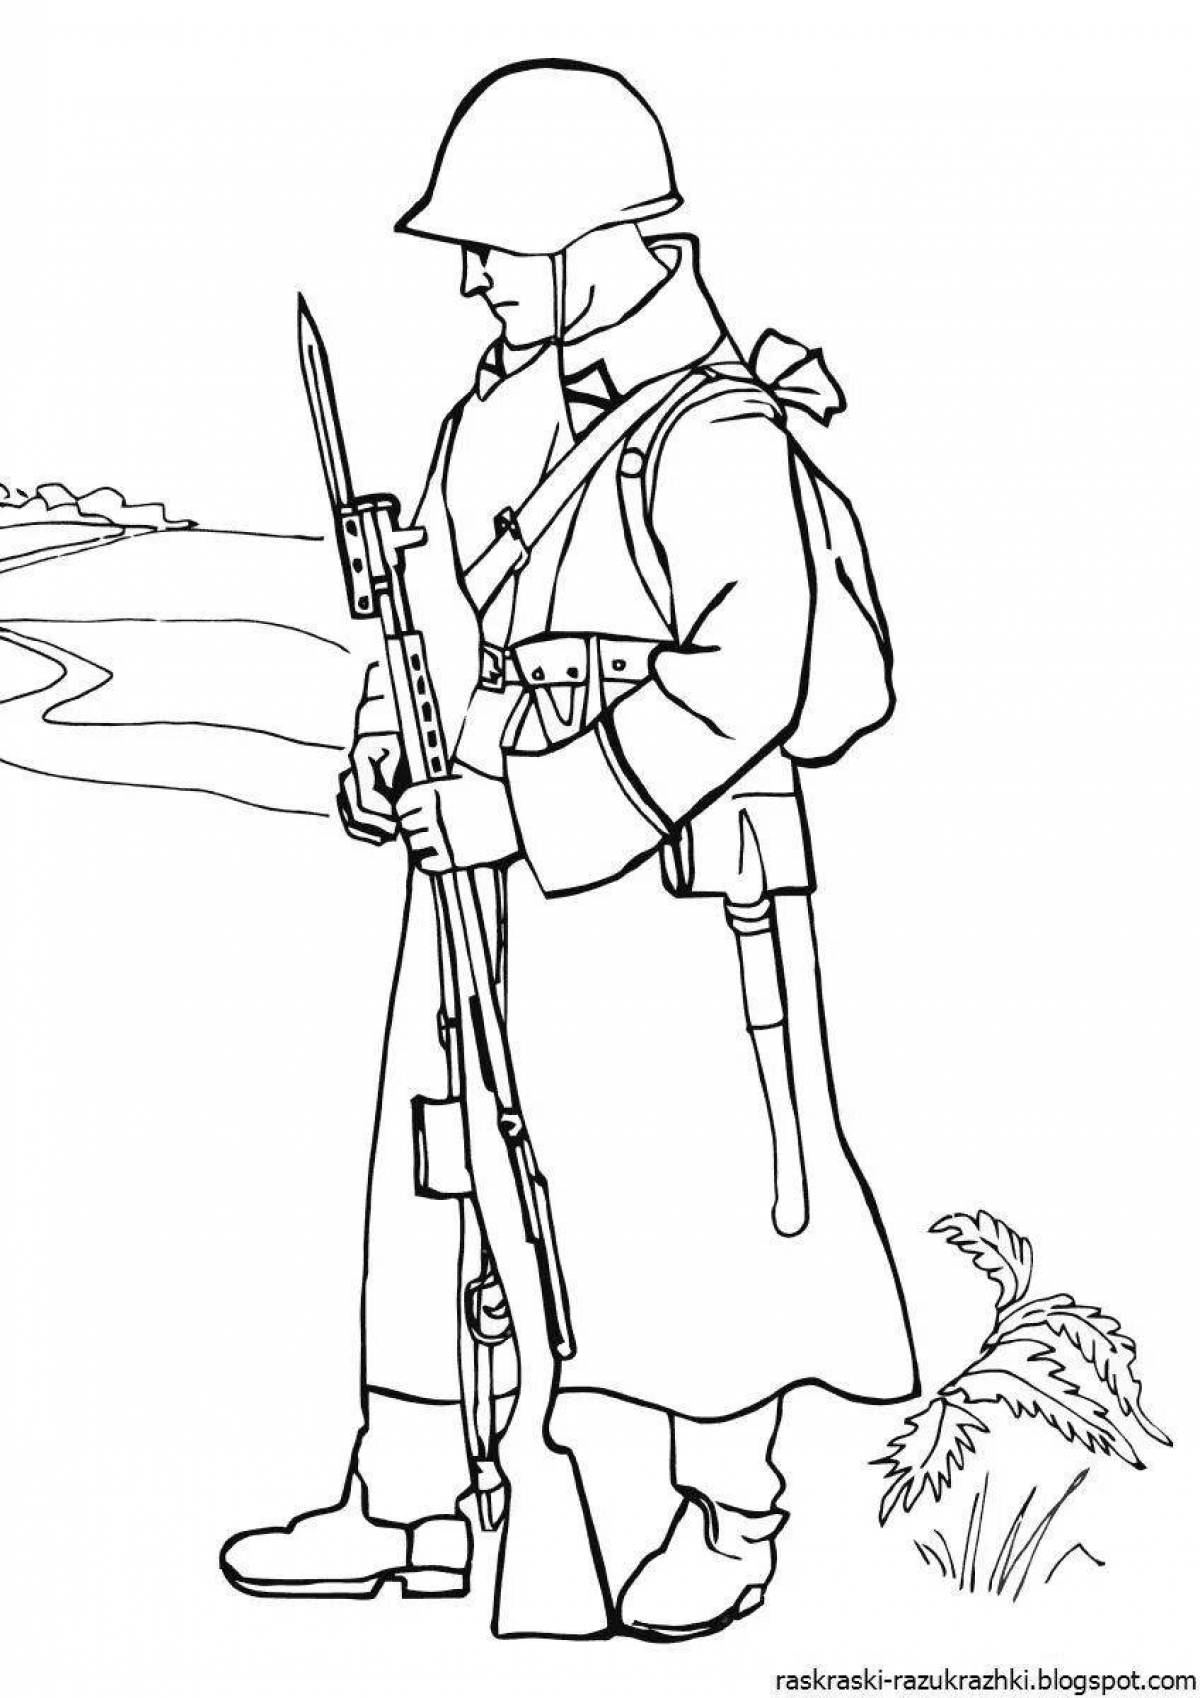 Colorful war heroes coloring pages for kids